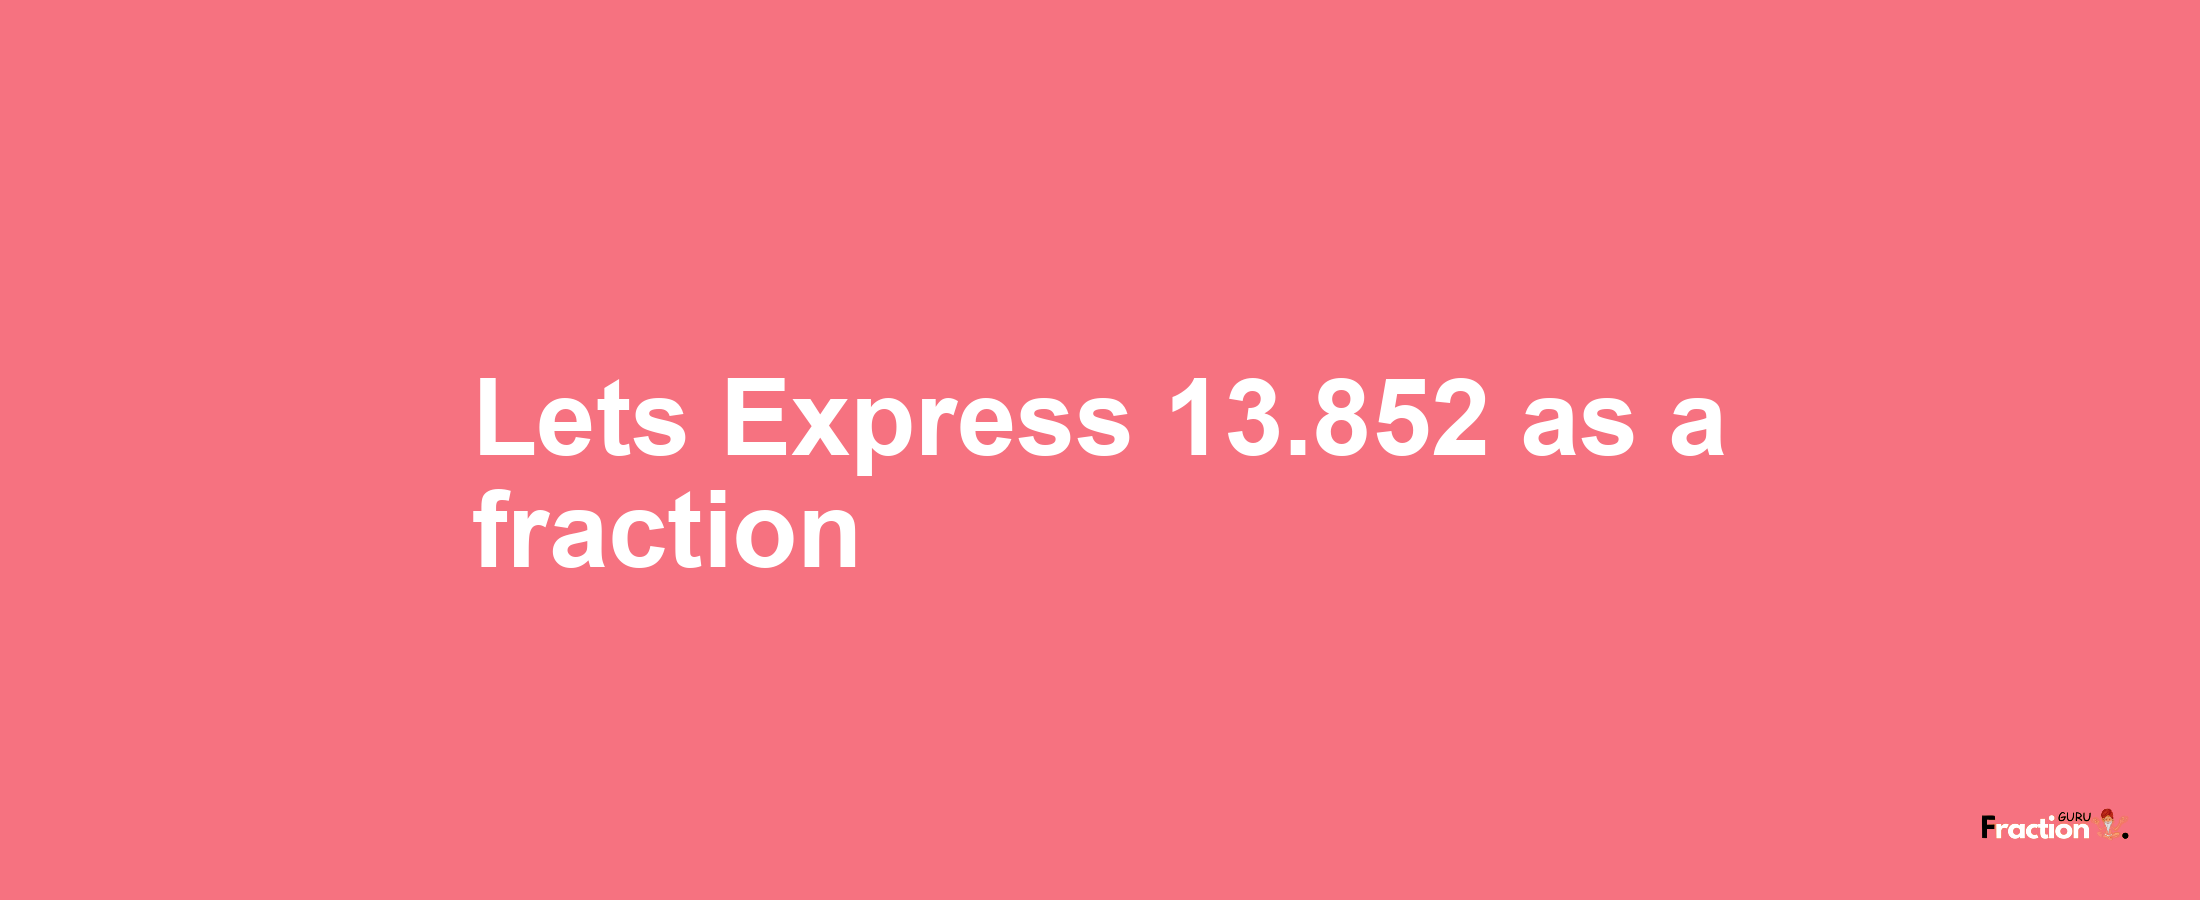 Lets Express 13.852 as afraction